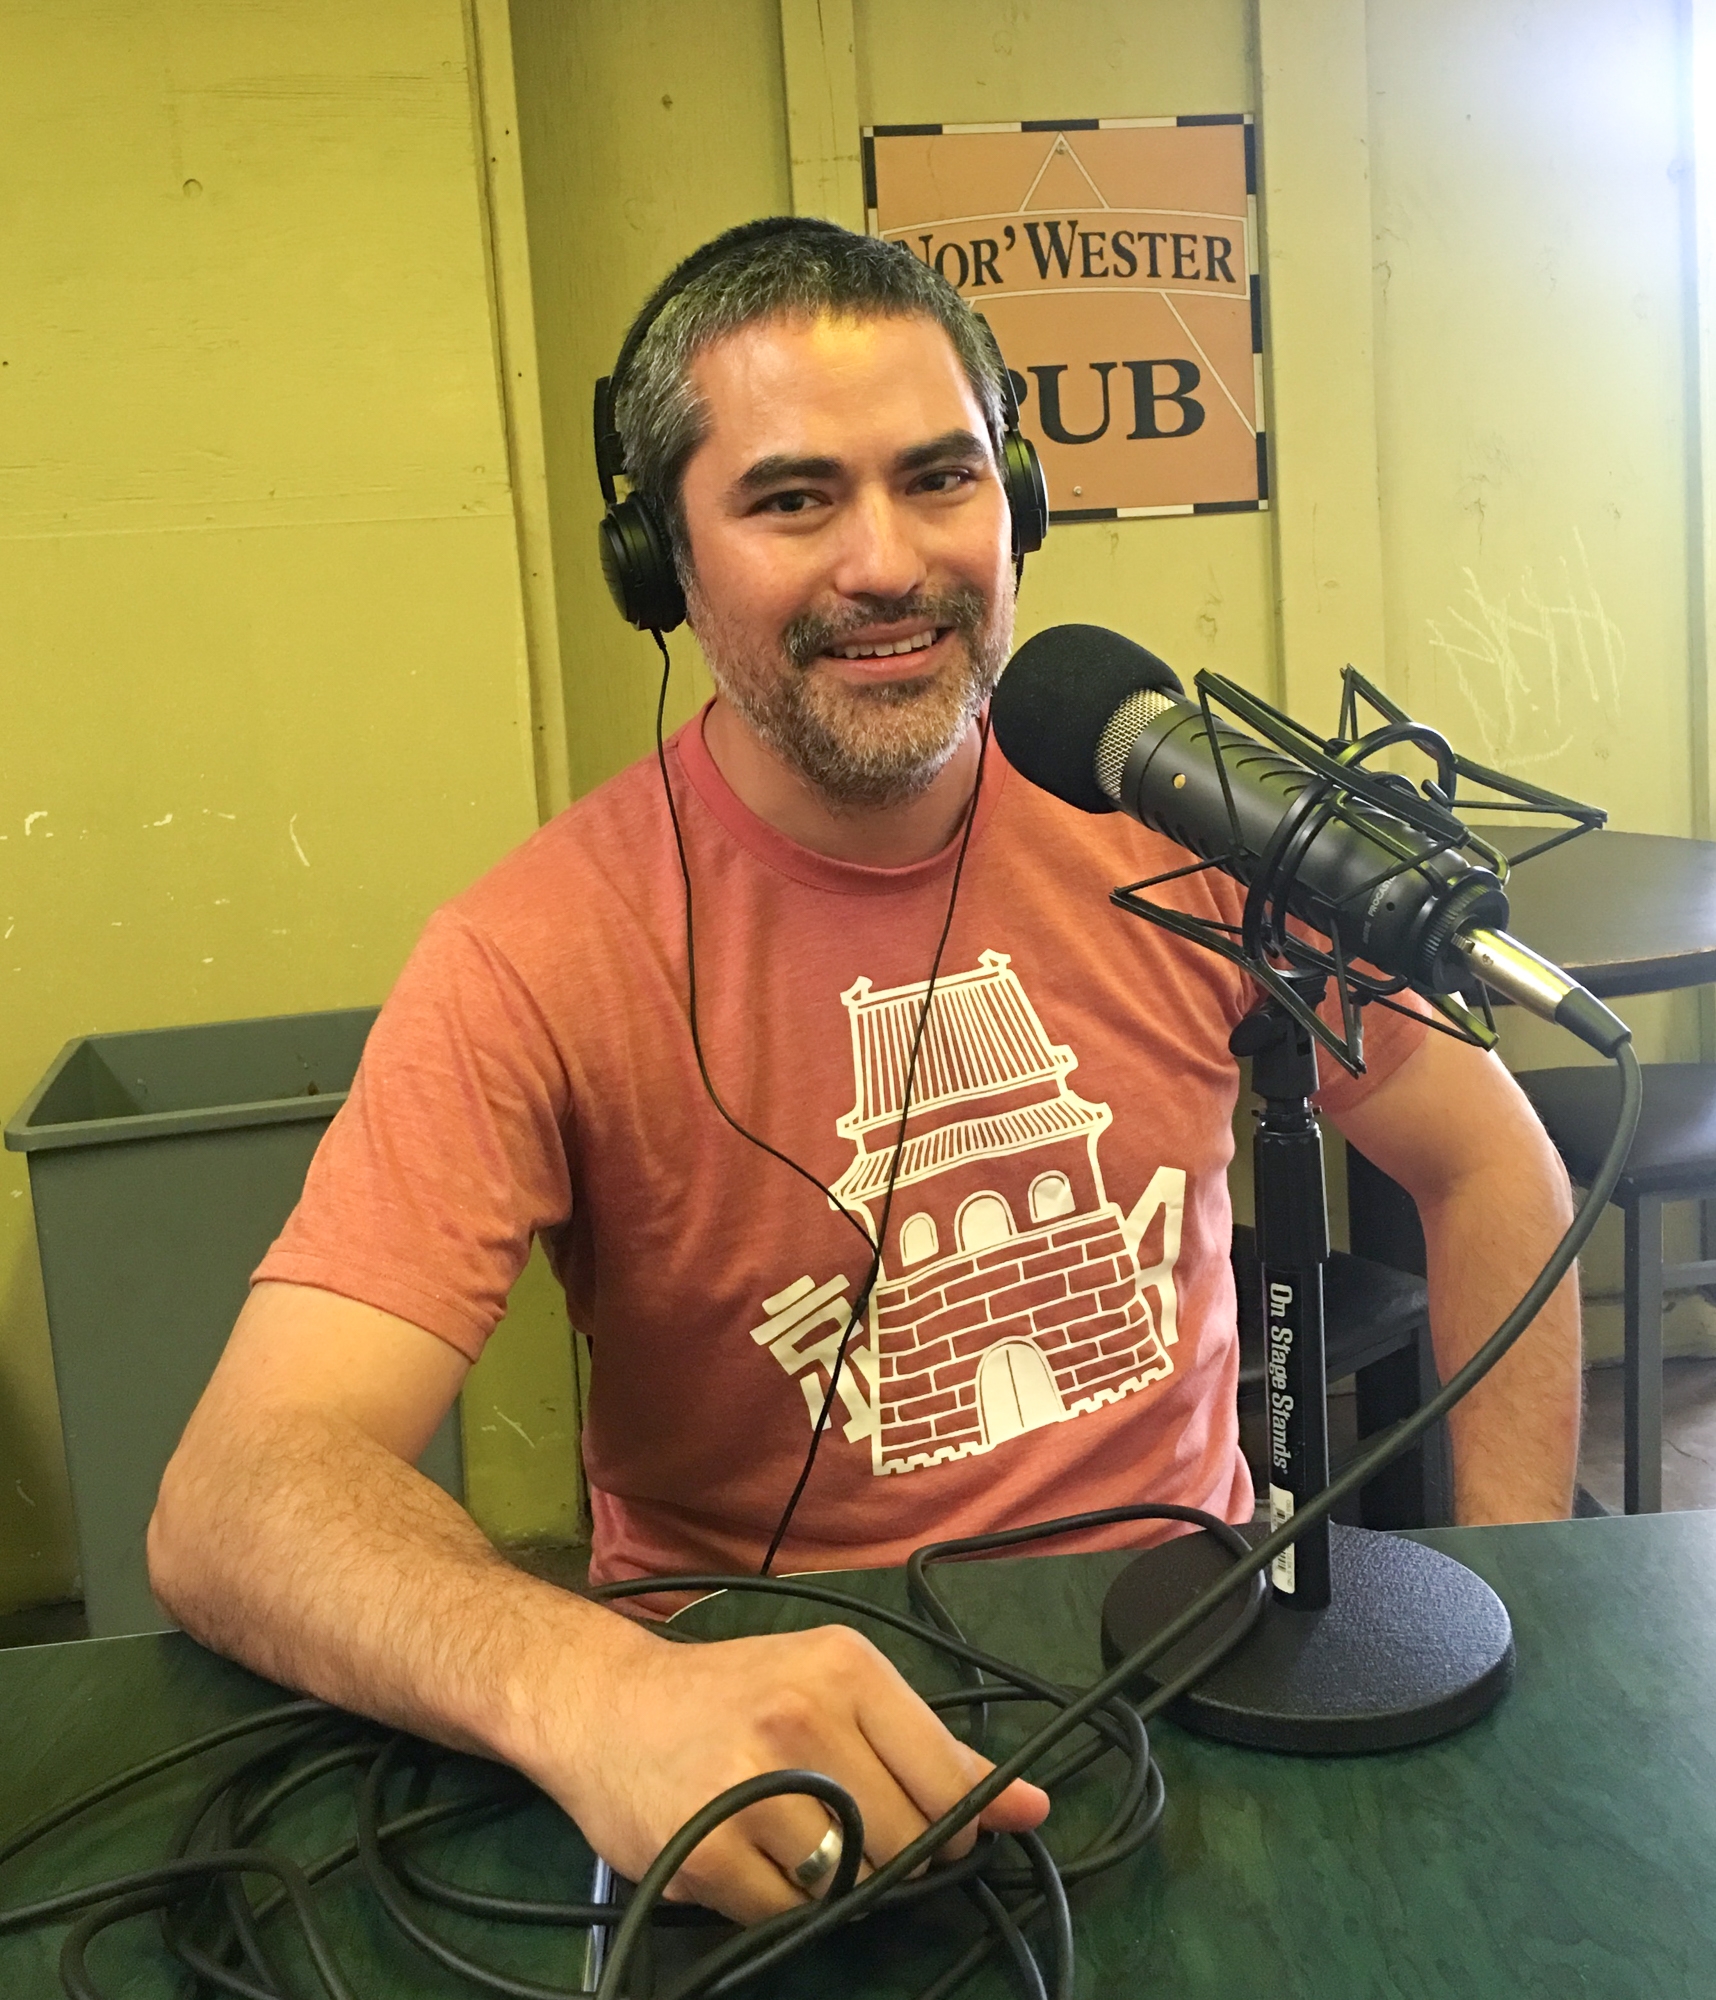 Alex Acker Jing-A Brewing Co. - Portland Beer Podcast episode 76 From The Archives by Steven Shomler